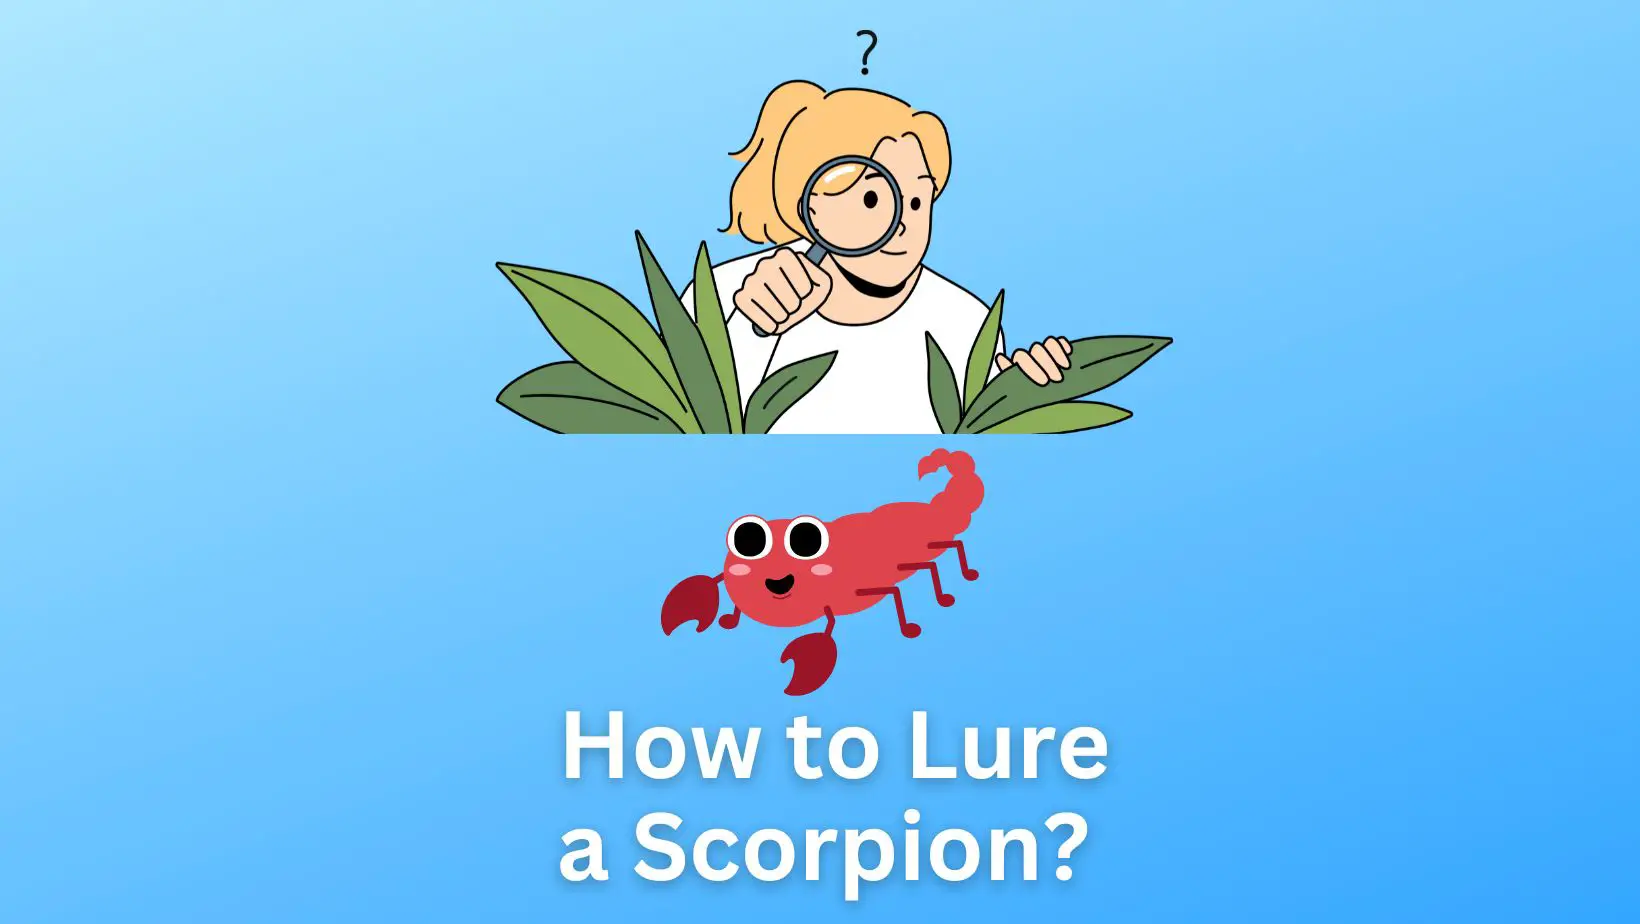 How to Lure a Scorpion